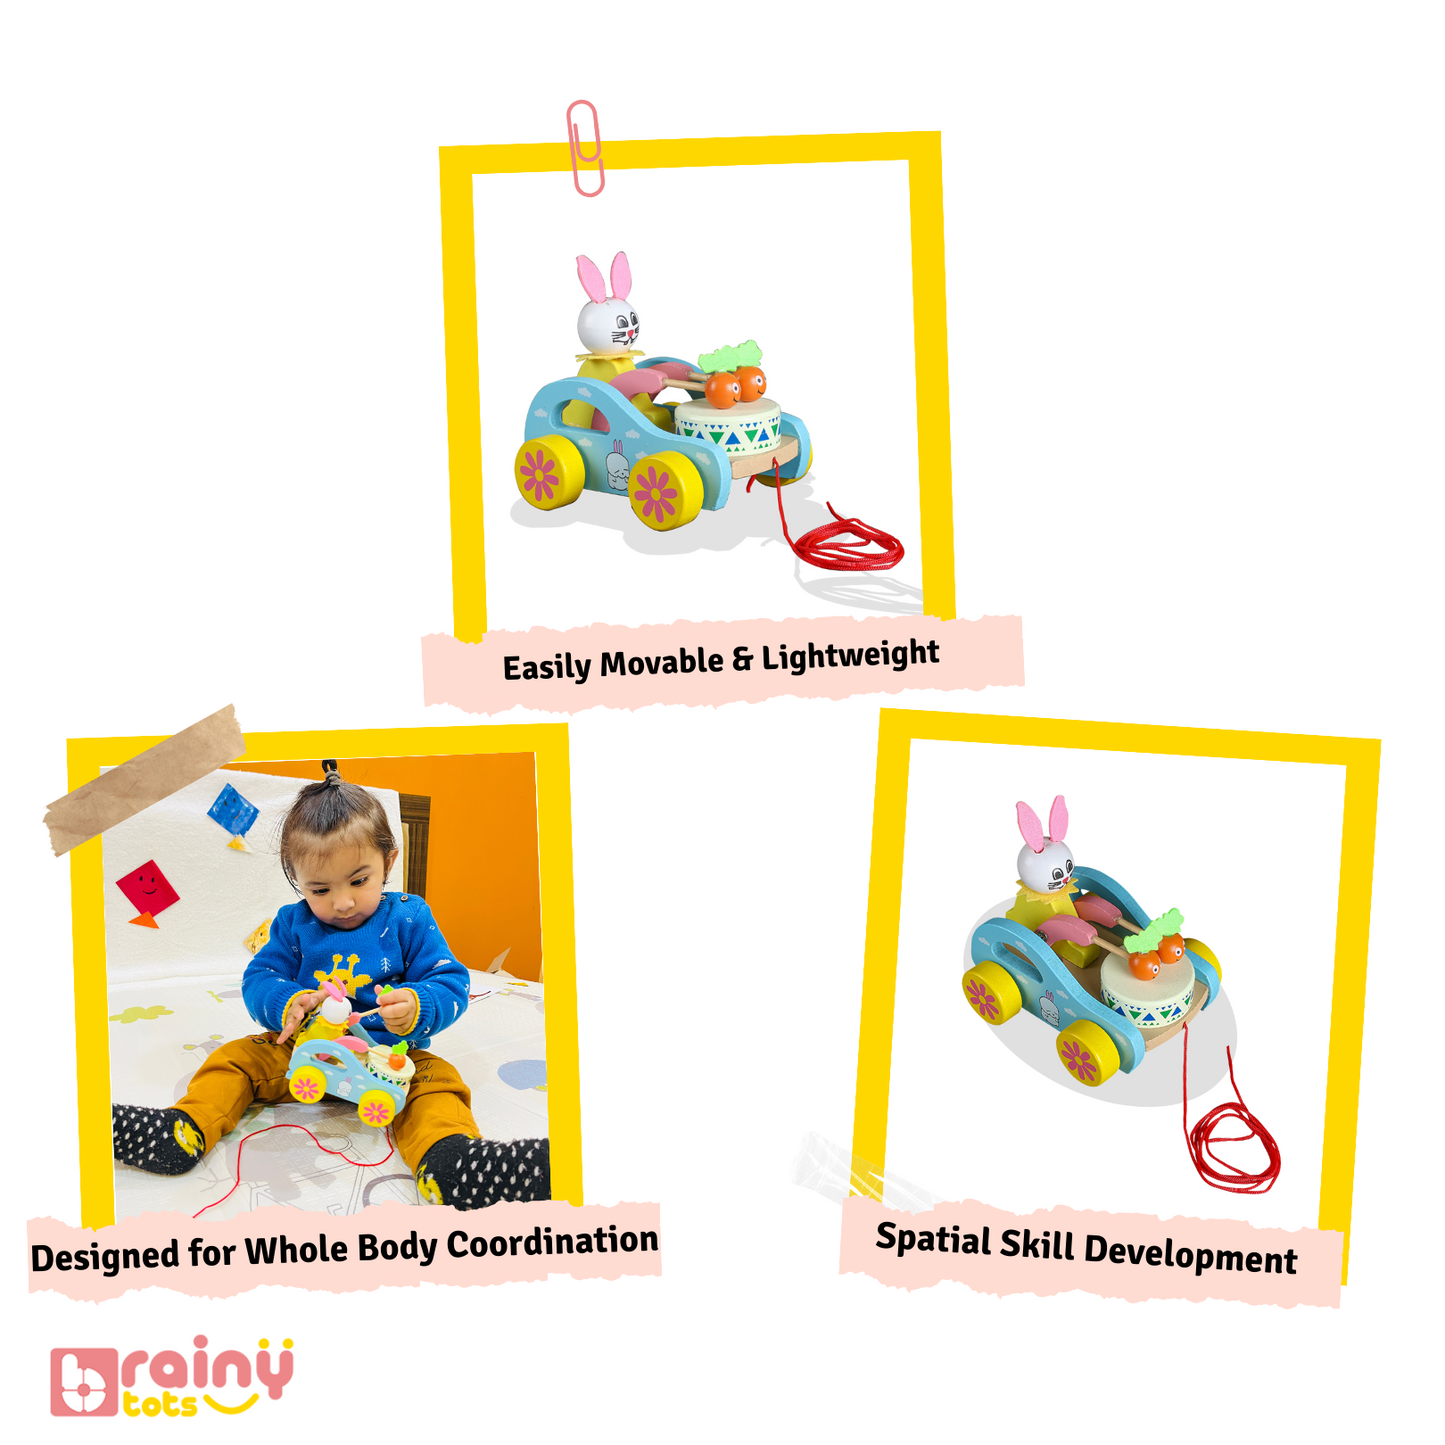 Explore the captivating features of our Pull Toy Dimension image, evoking nostalgia and creativity. Explore our website for more enchanting visuals and products that promise to inspire imagination.